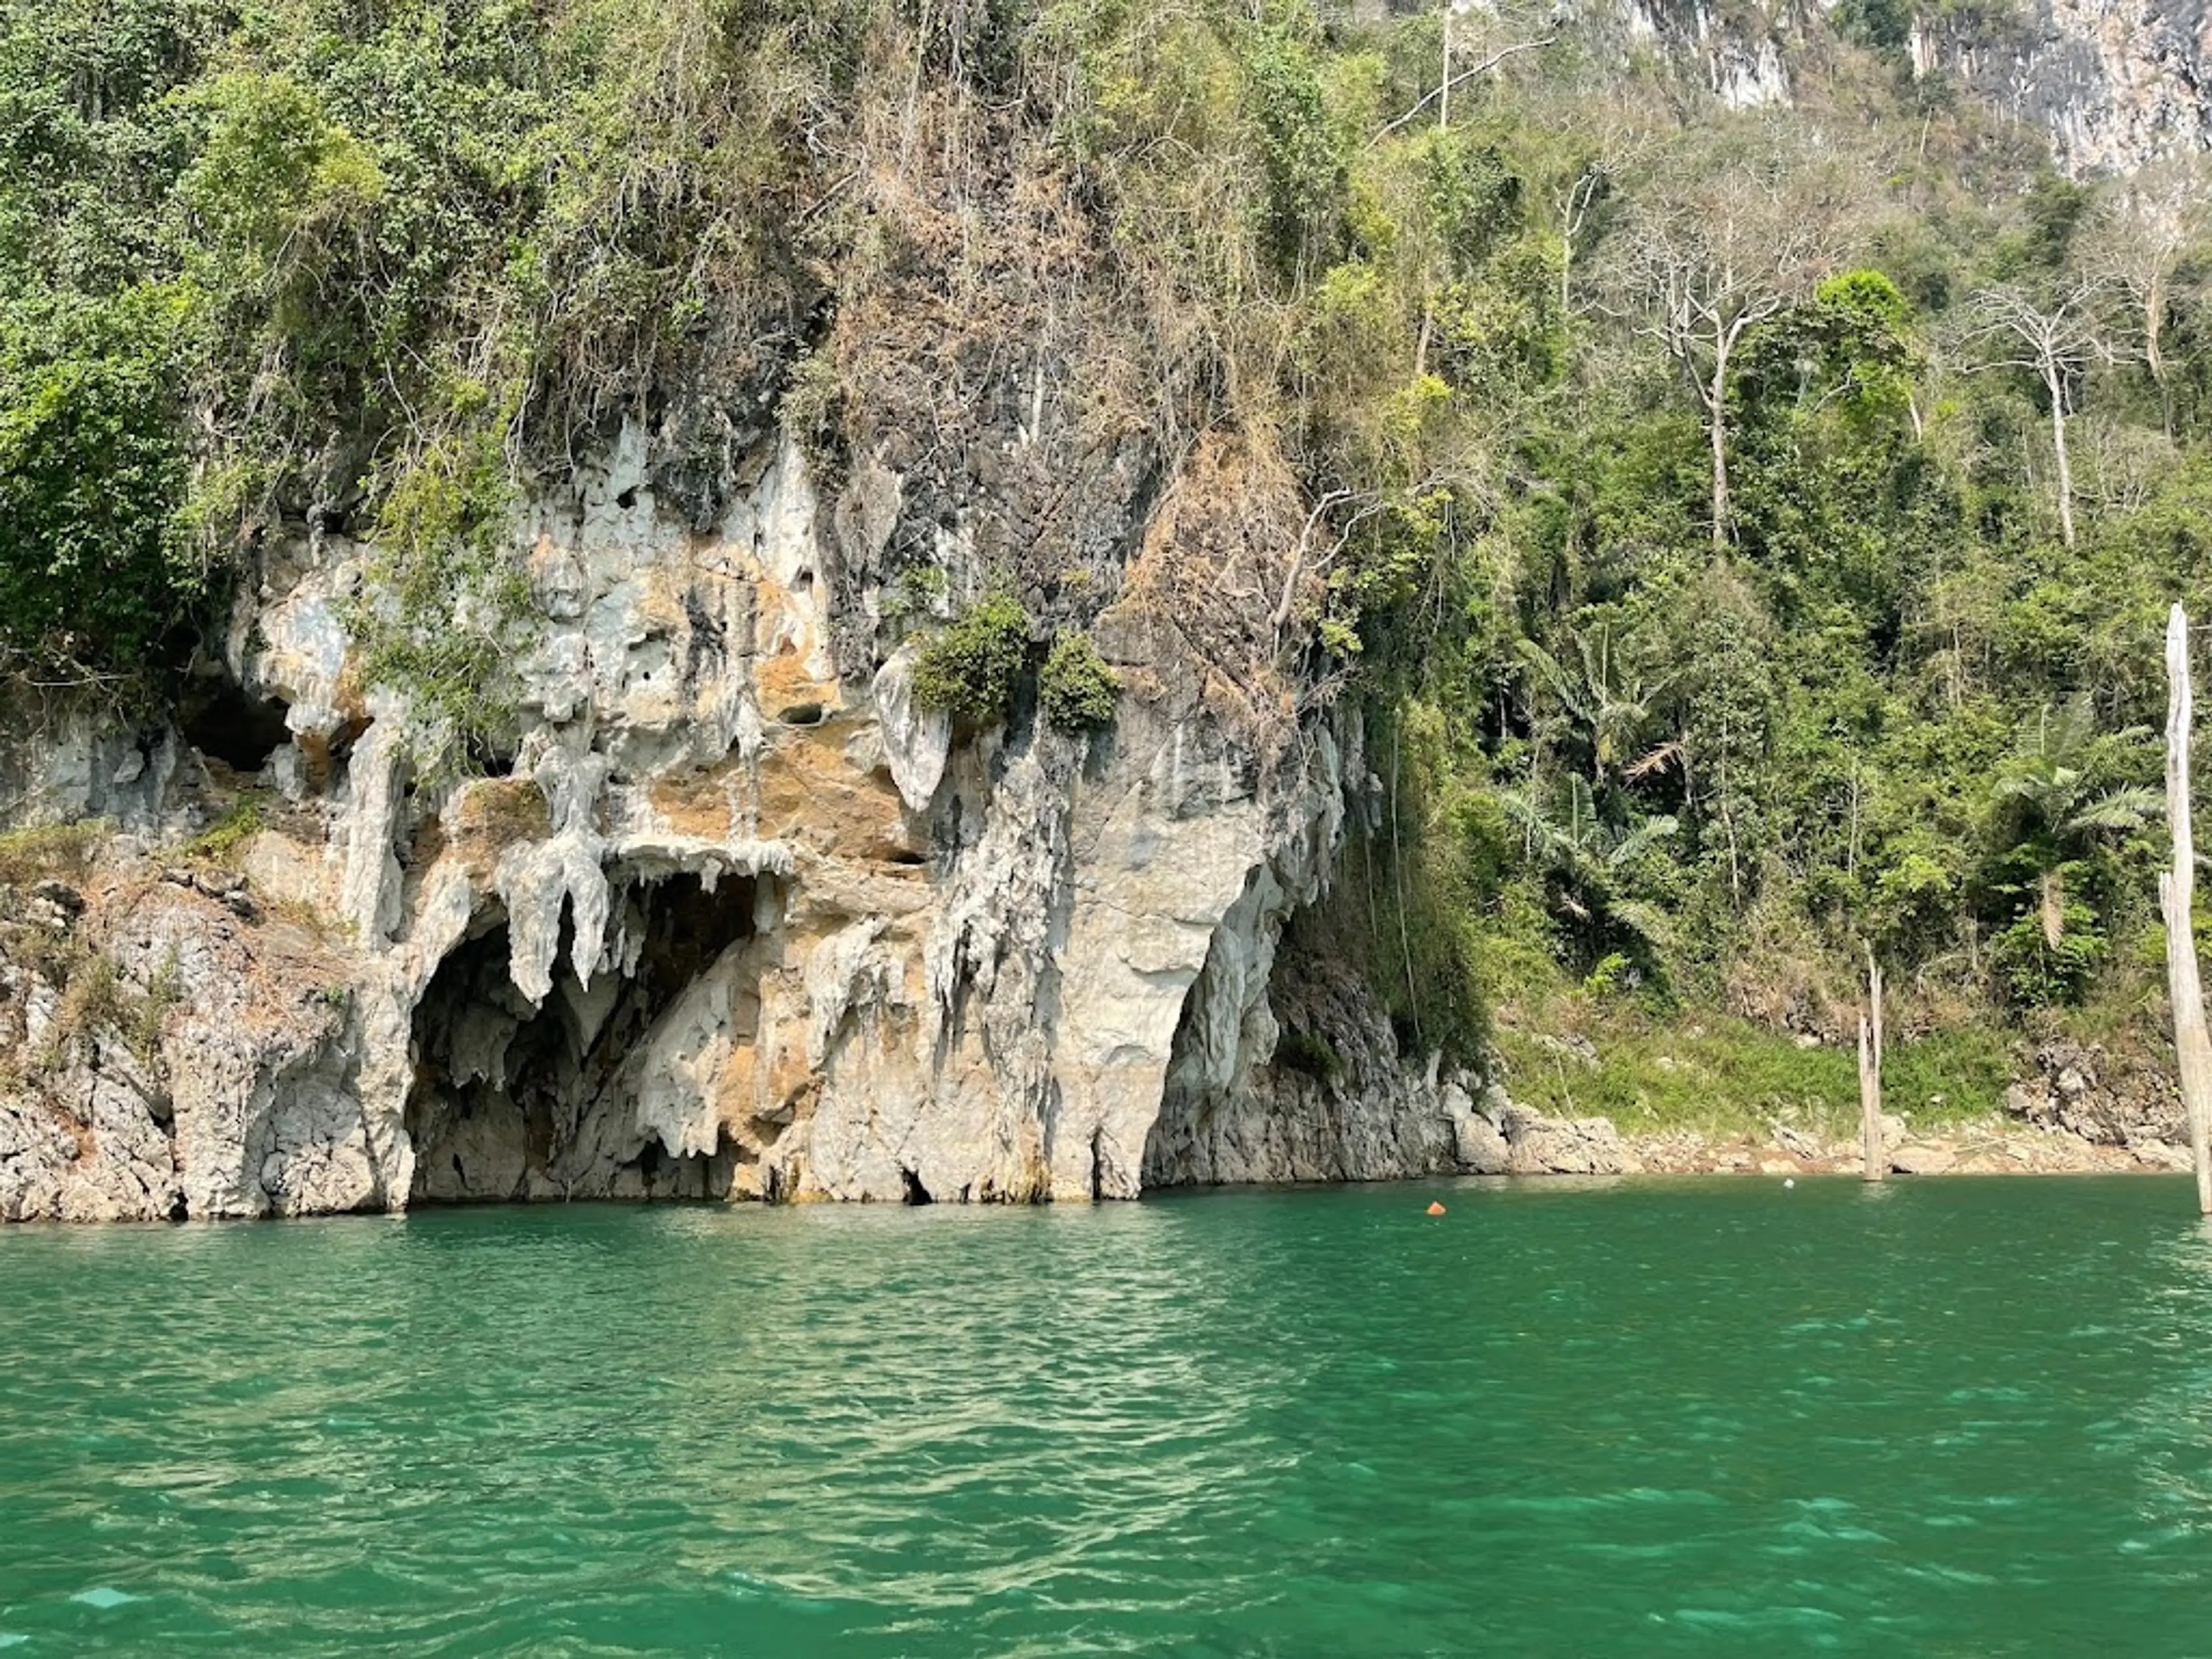 Limestone cliffs and caves